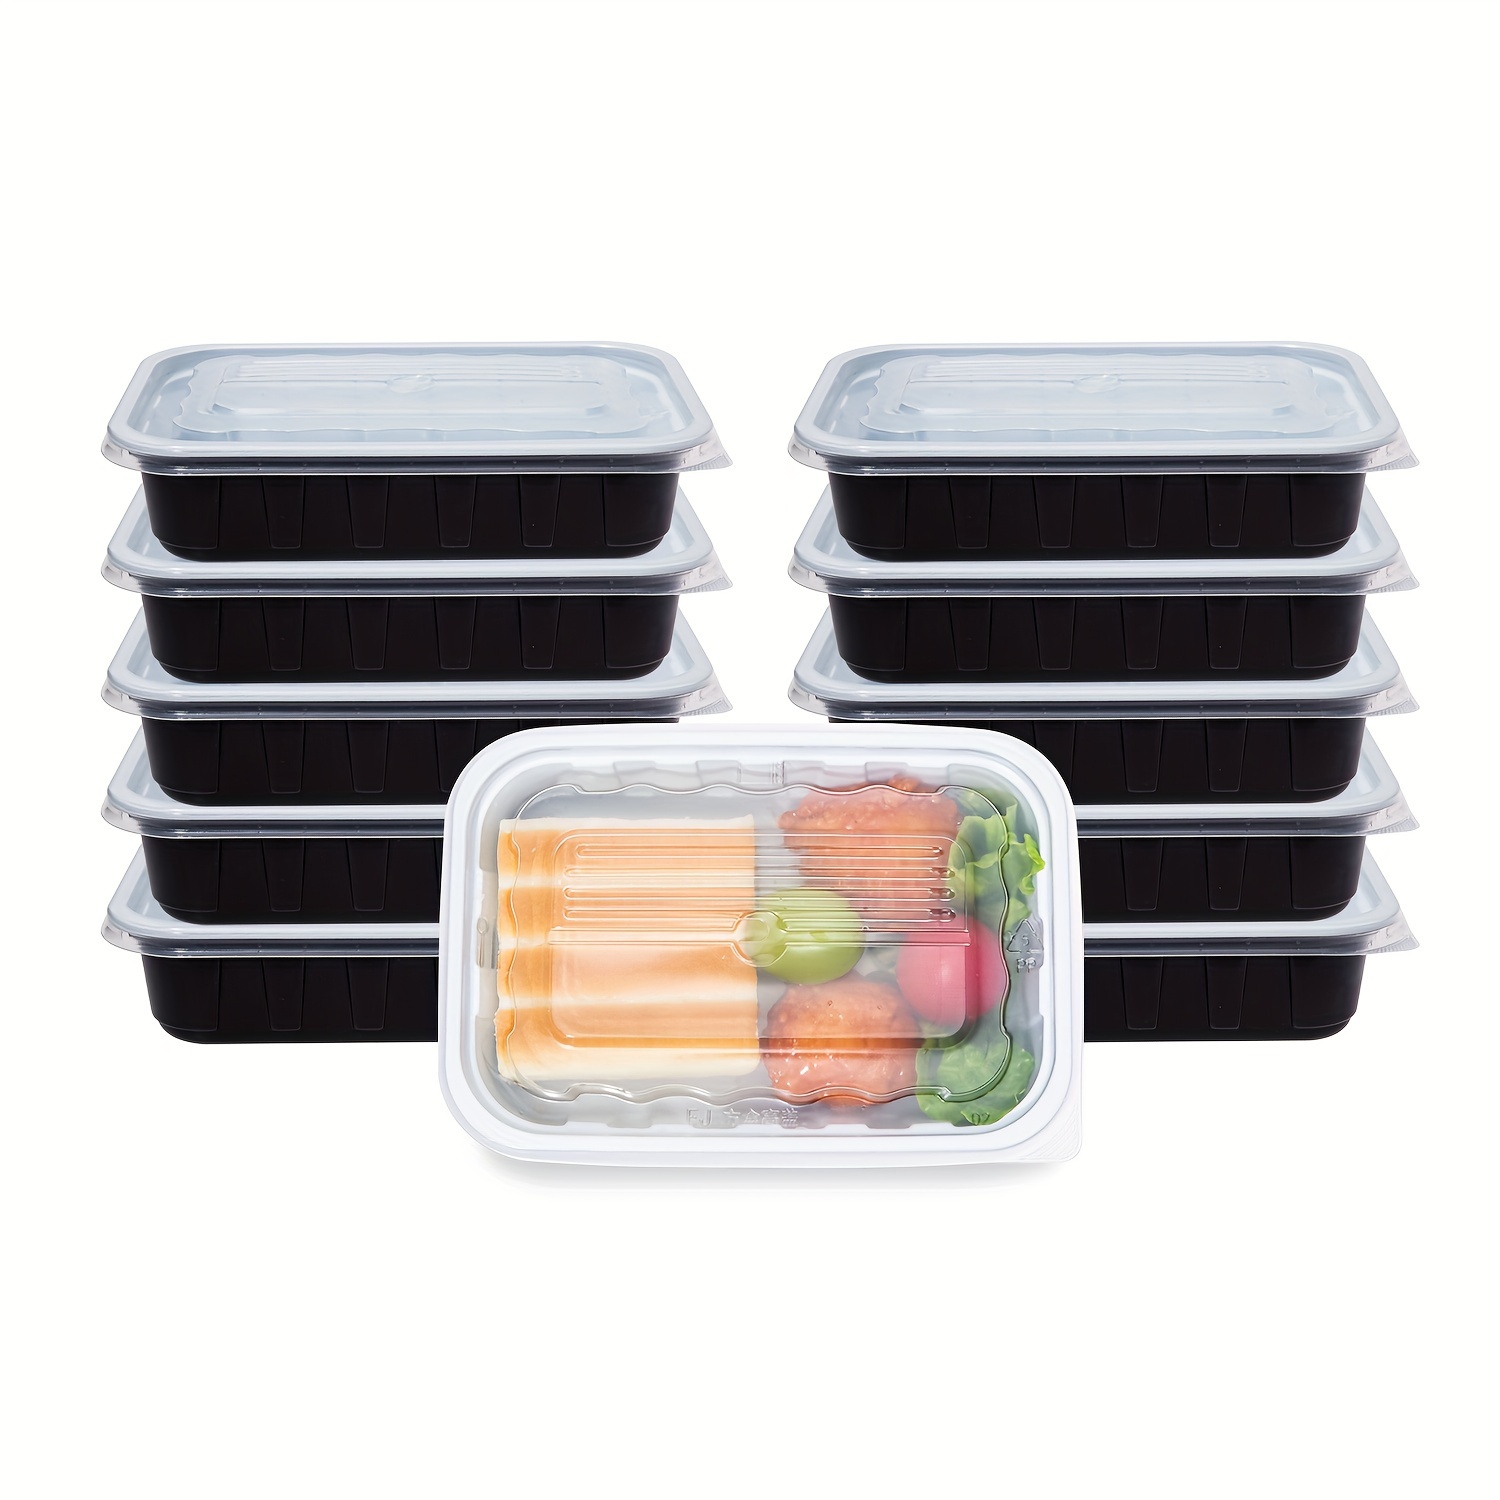 10 Pack 28 oz Meal Prep Containers Reusable Food Storage Disposable Plastic